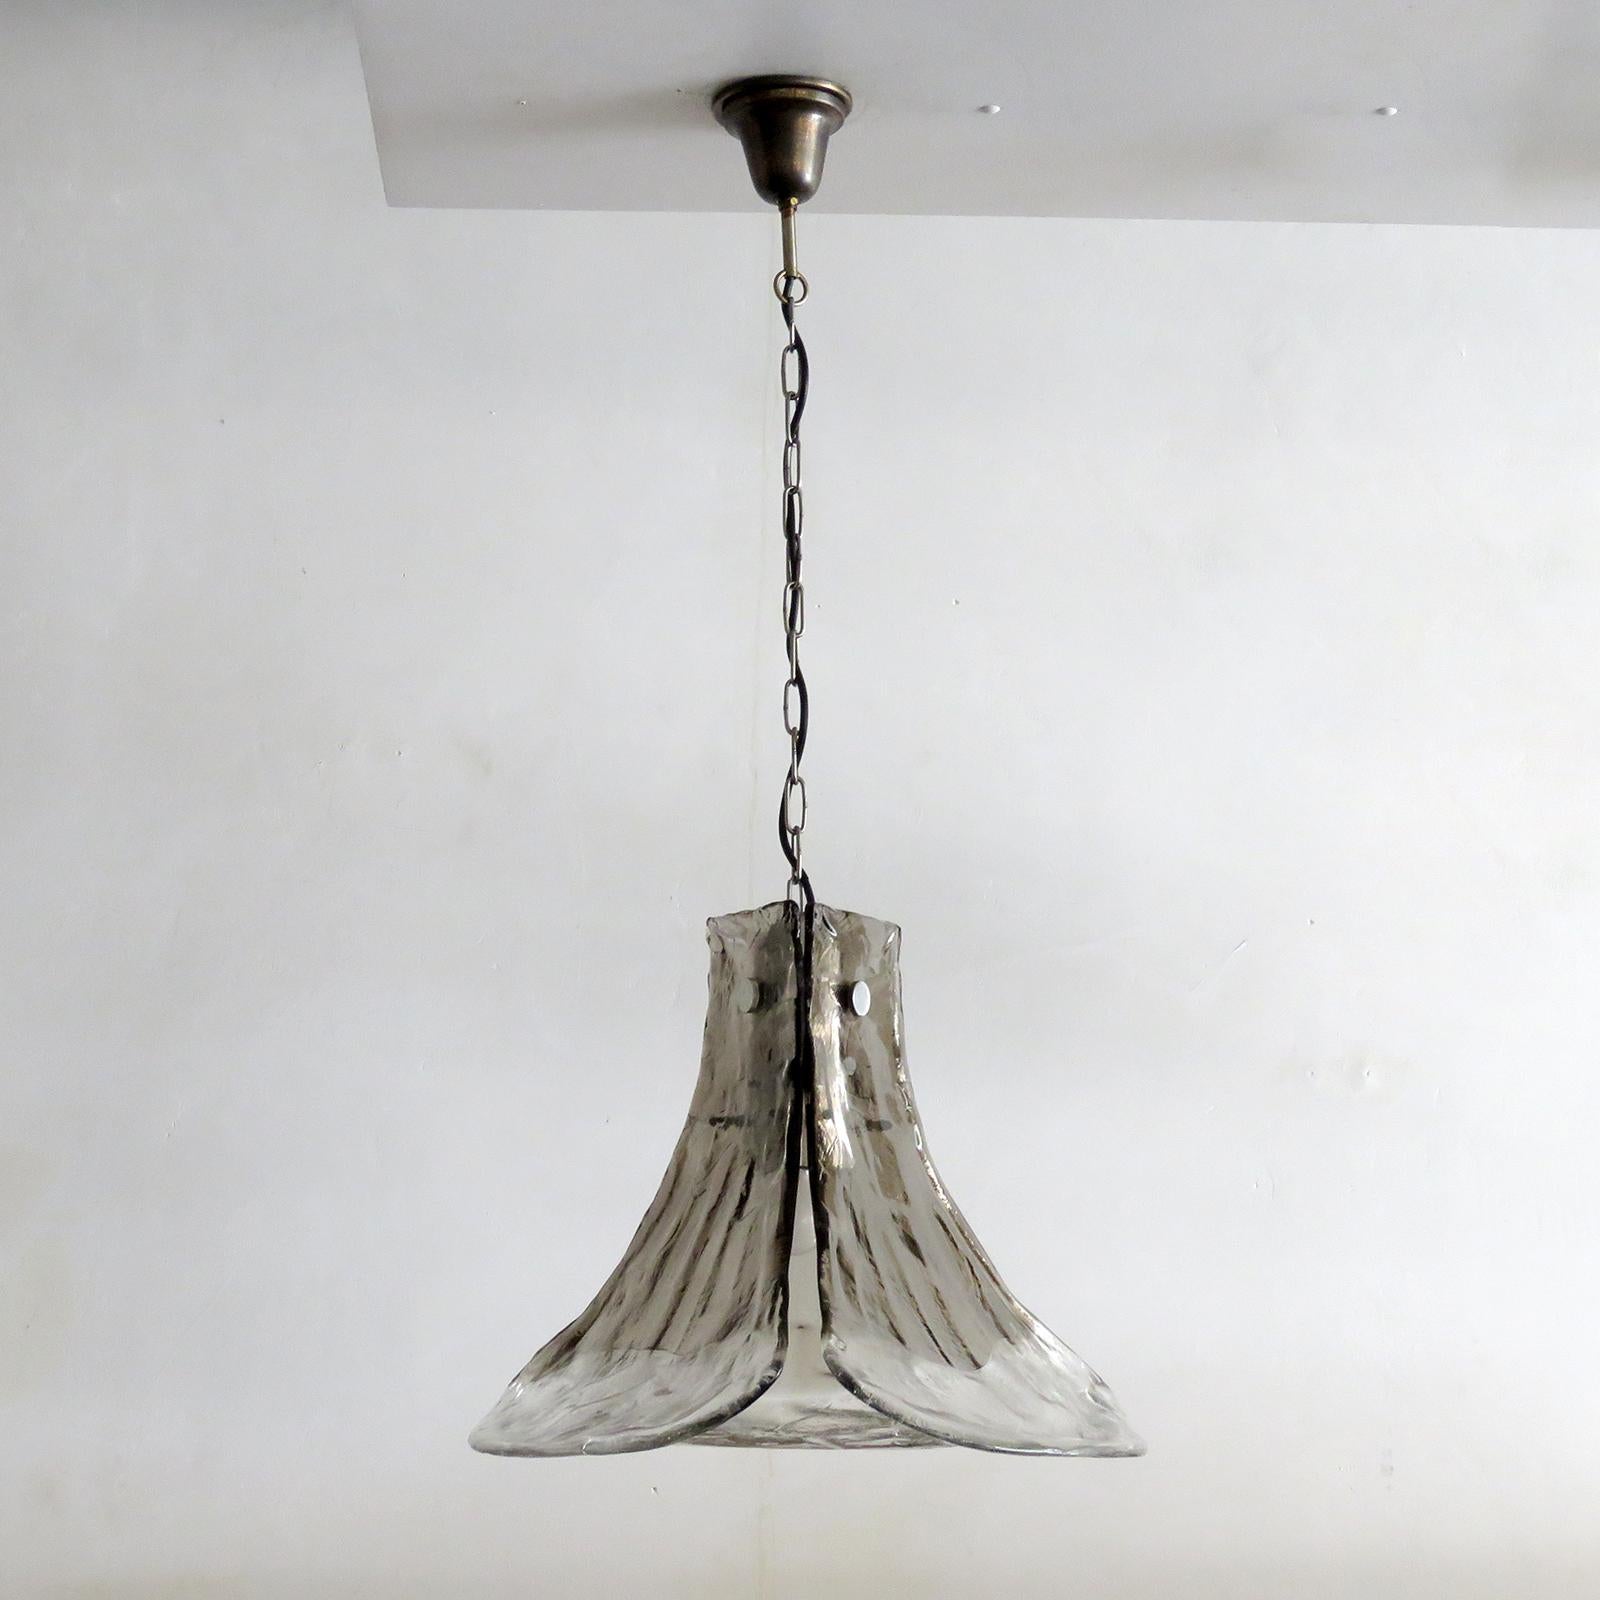 Wonderful floral pendant light by Carlo Nason for AV Mazzega, Italy and J.T. Kalmar, Austria, with three hand-made clear and smoked Murano glass petals which are supported by a nickel plated metal frame, suspended from a chain, heavy quality and in